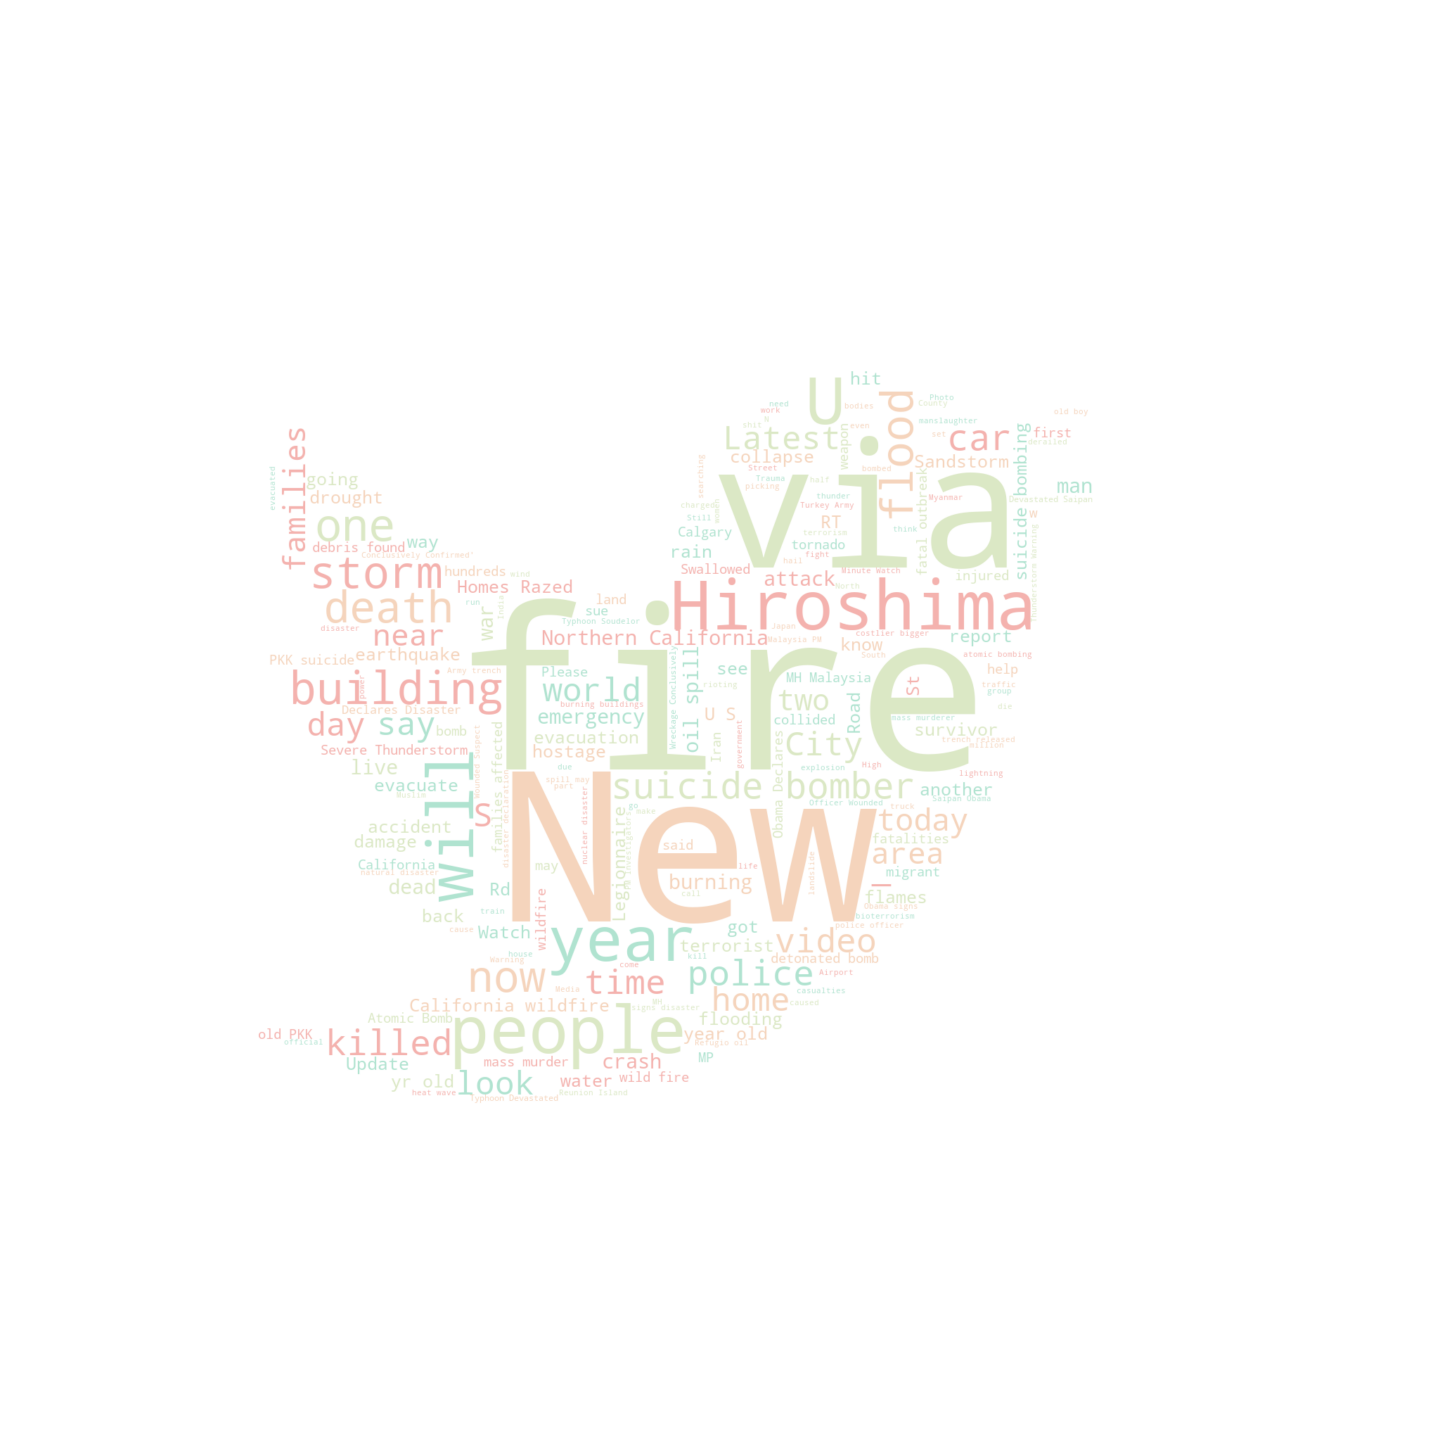 Wordcloud from Tweets related to disaster events (different color palette)